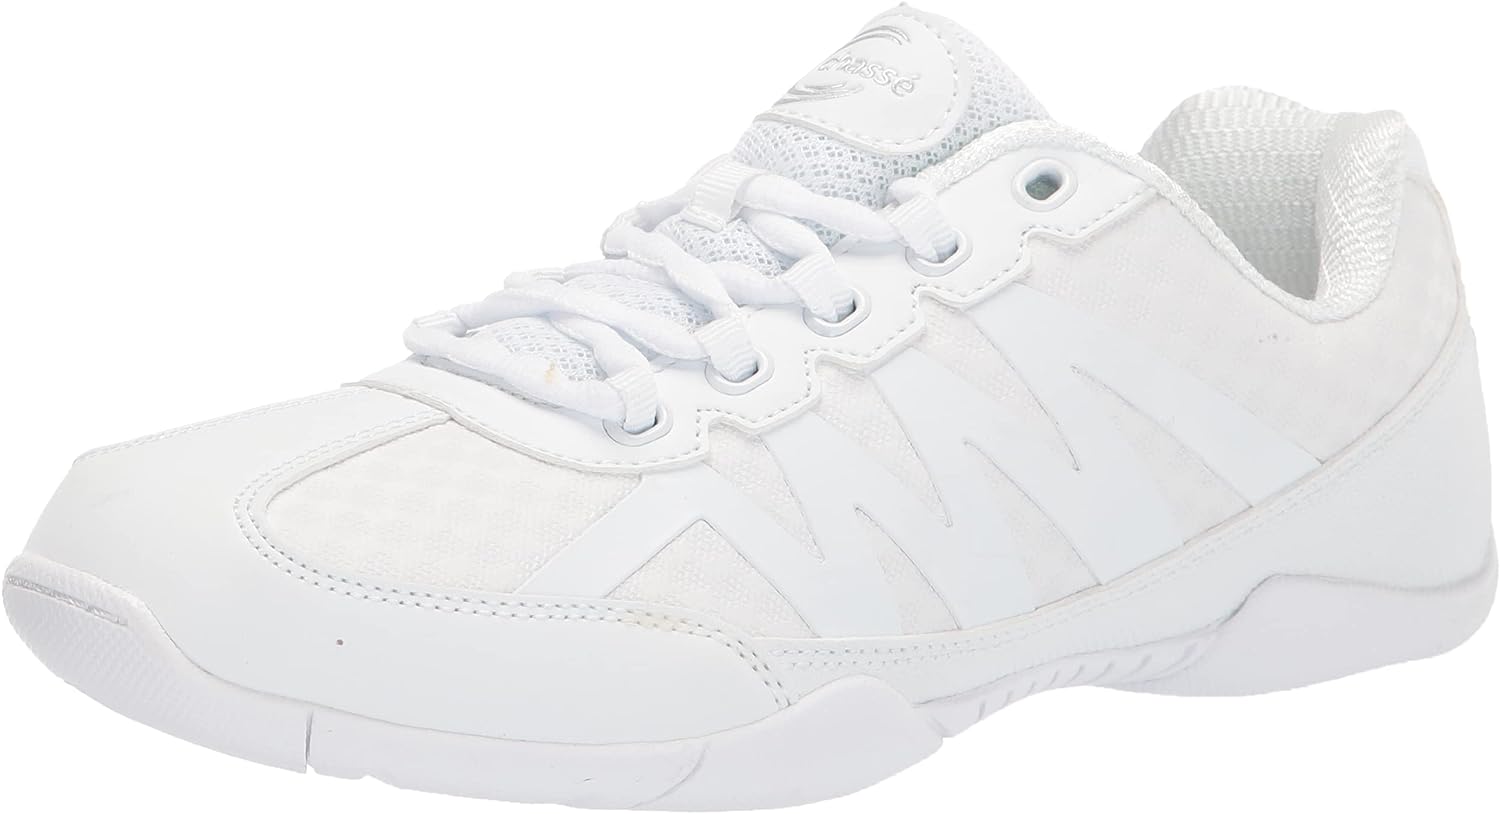 chassé Apex Cheerleading Shoes - White Cheer Shoes for [...]